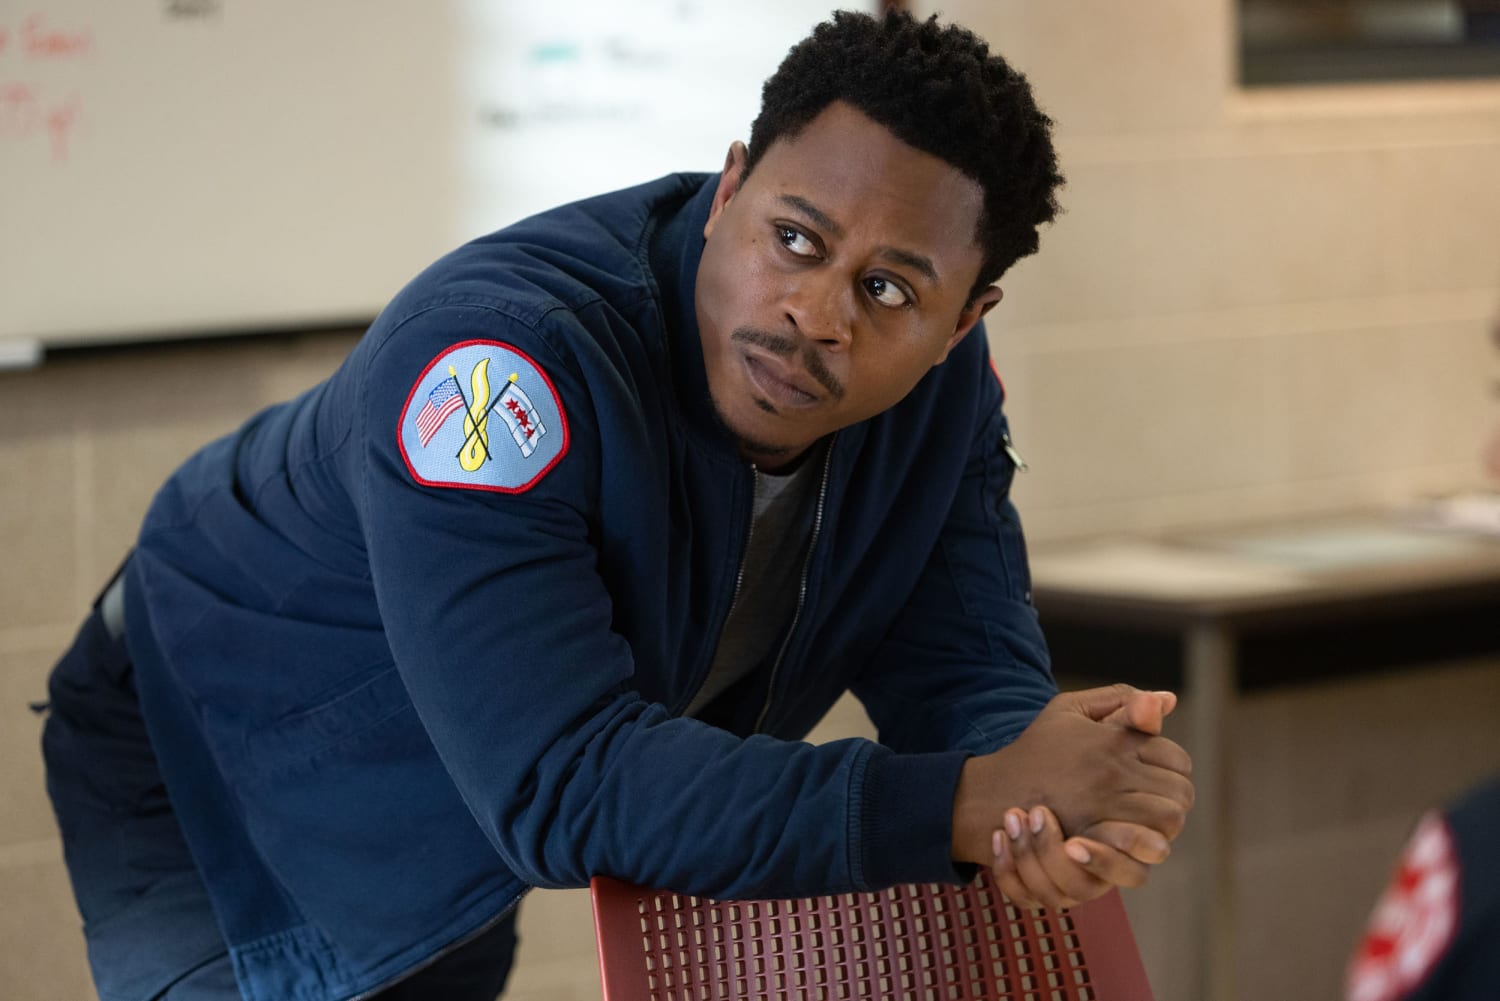 ‘Chicago Fire’ star Daniel Kyri is thriving in his ‘unapologetic era’